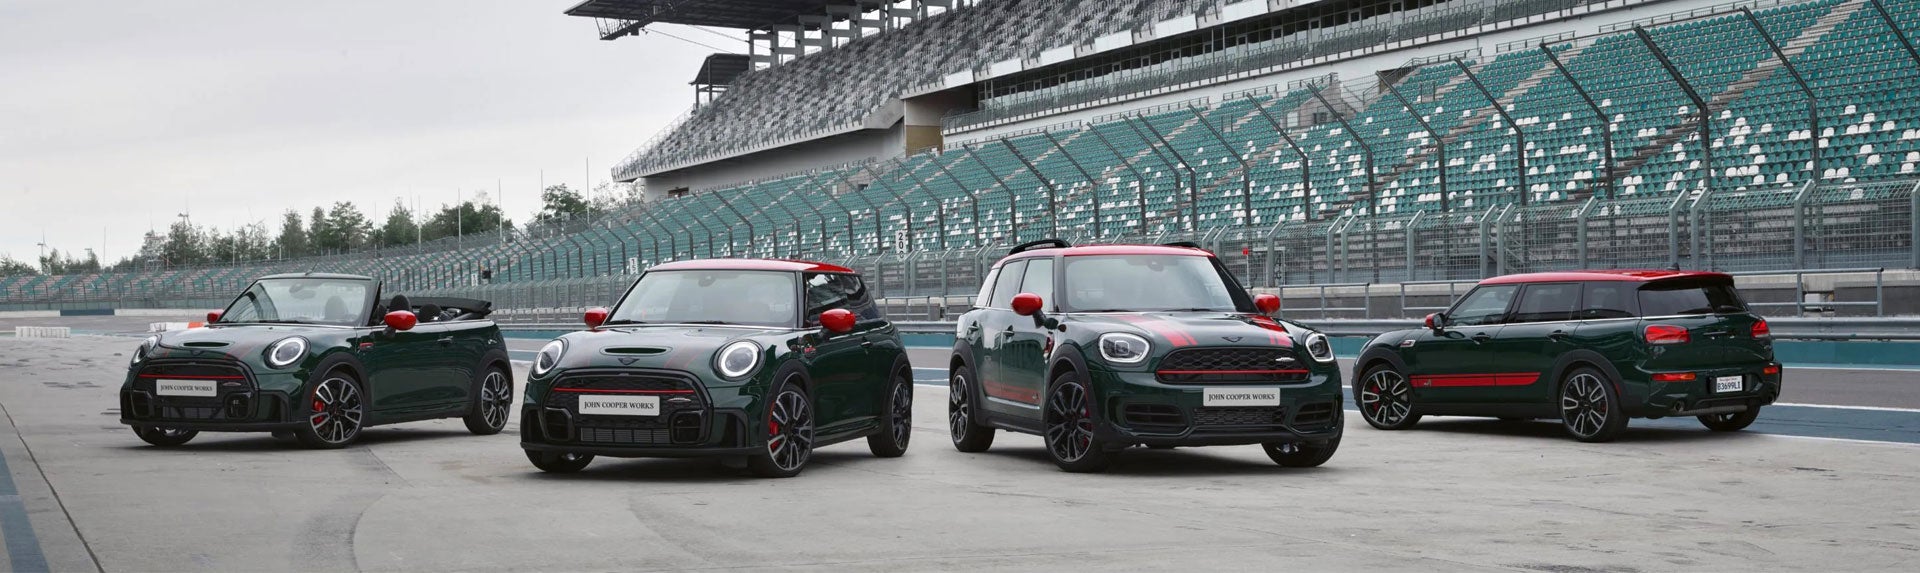 Family of four MINI John Cooper Works models parked on a race track. | MINIDemo3 in Derwood MD